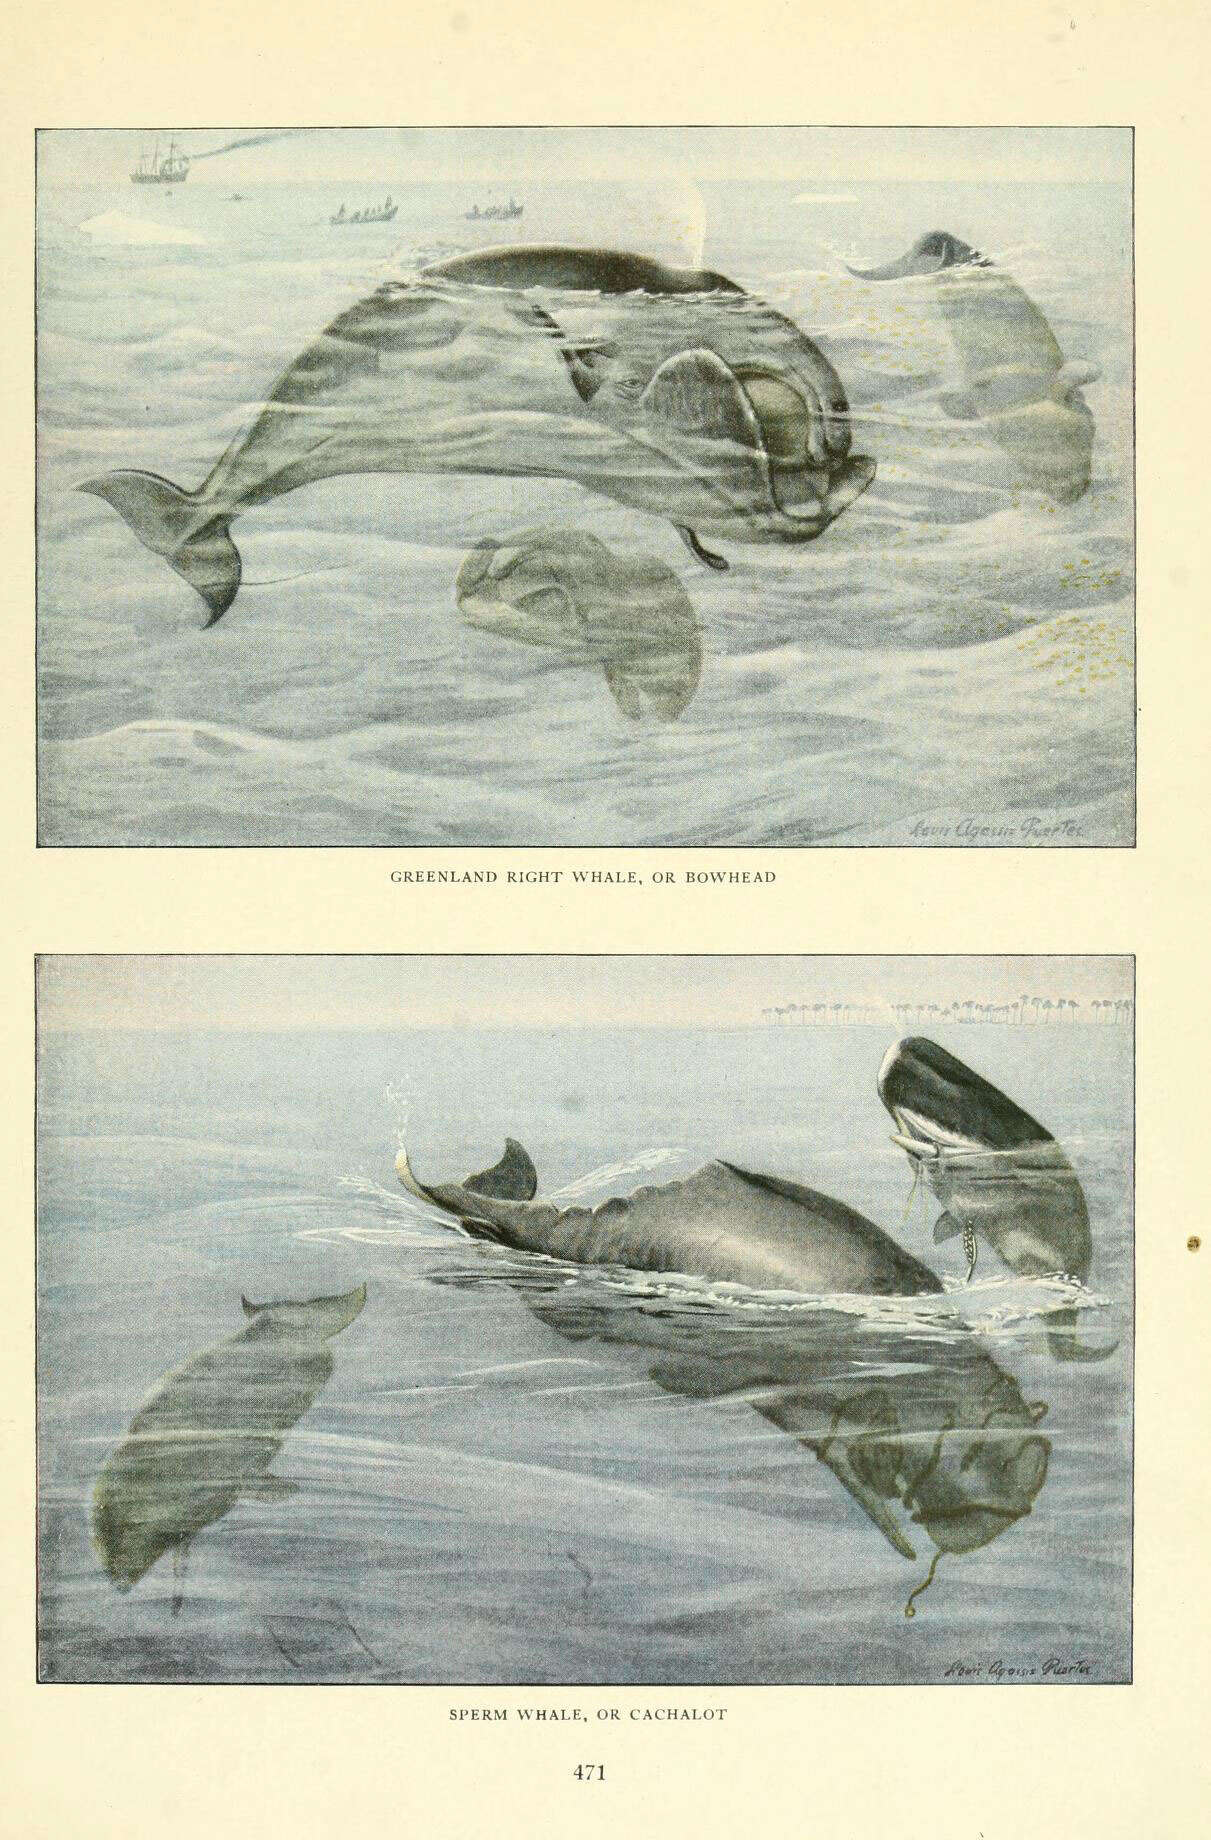 Image of right whales and bowhead whales